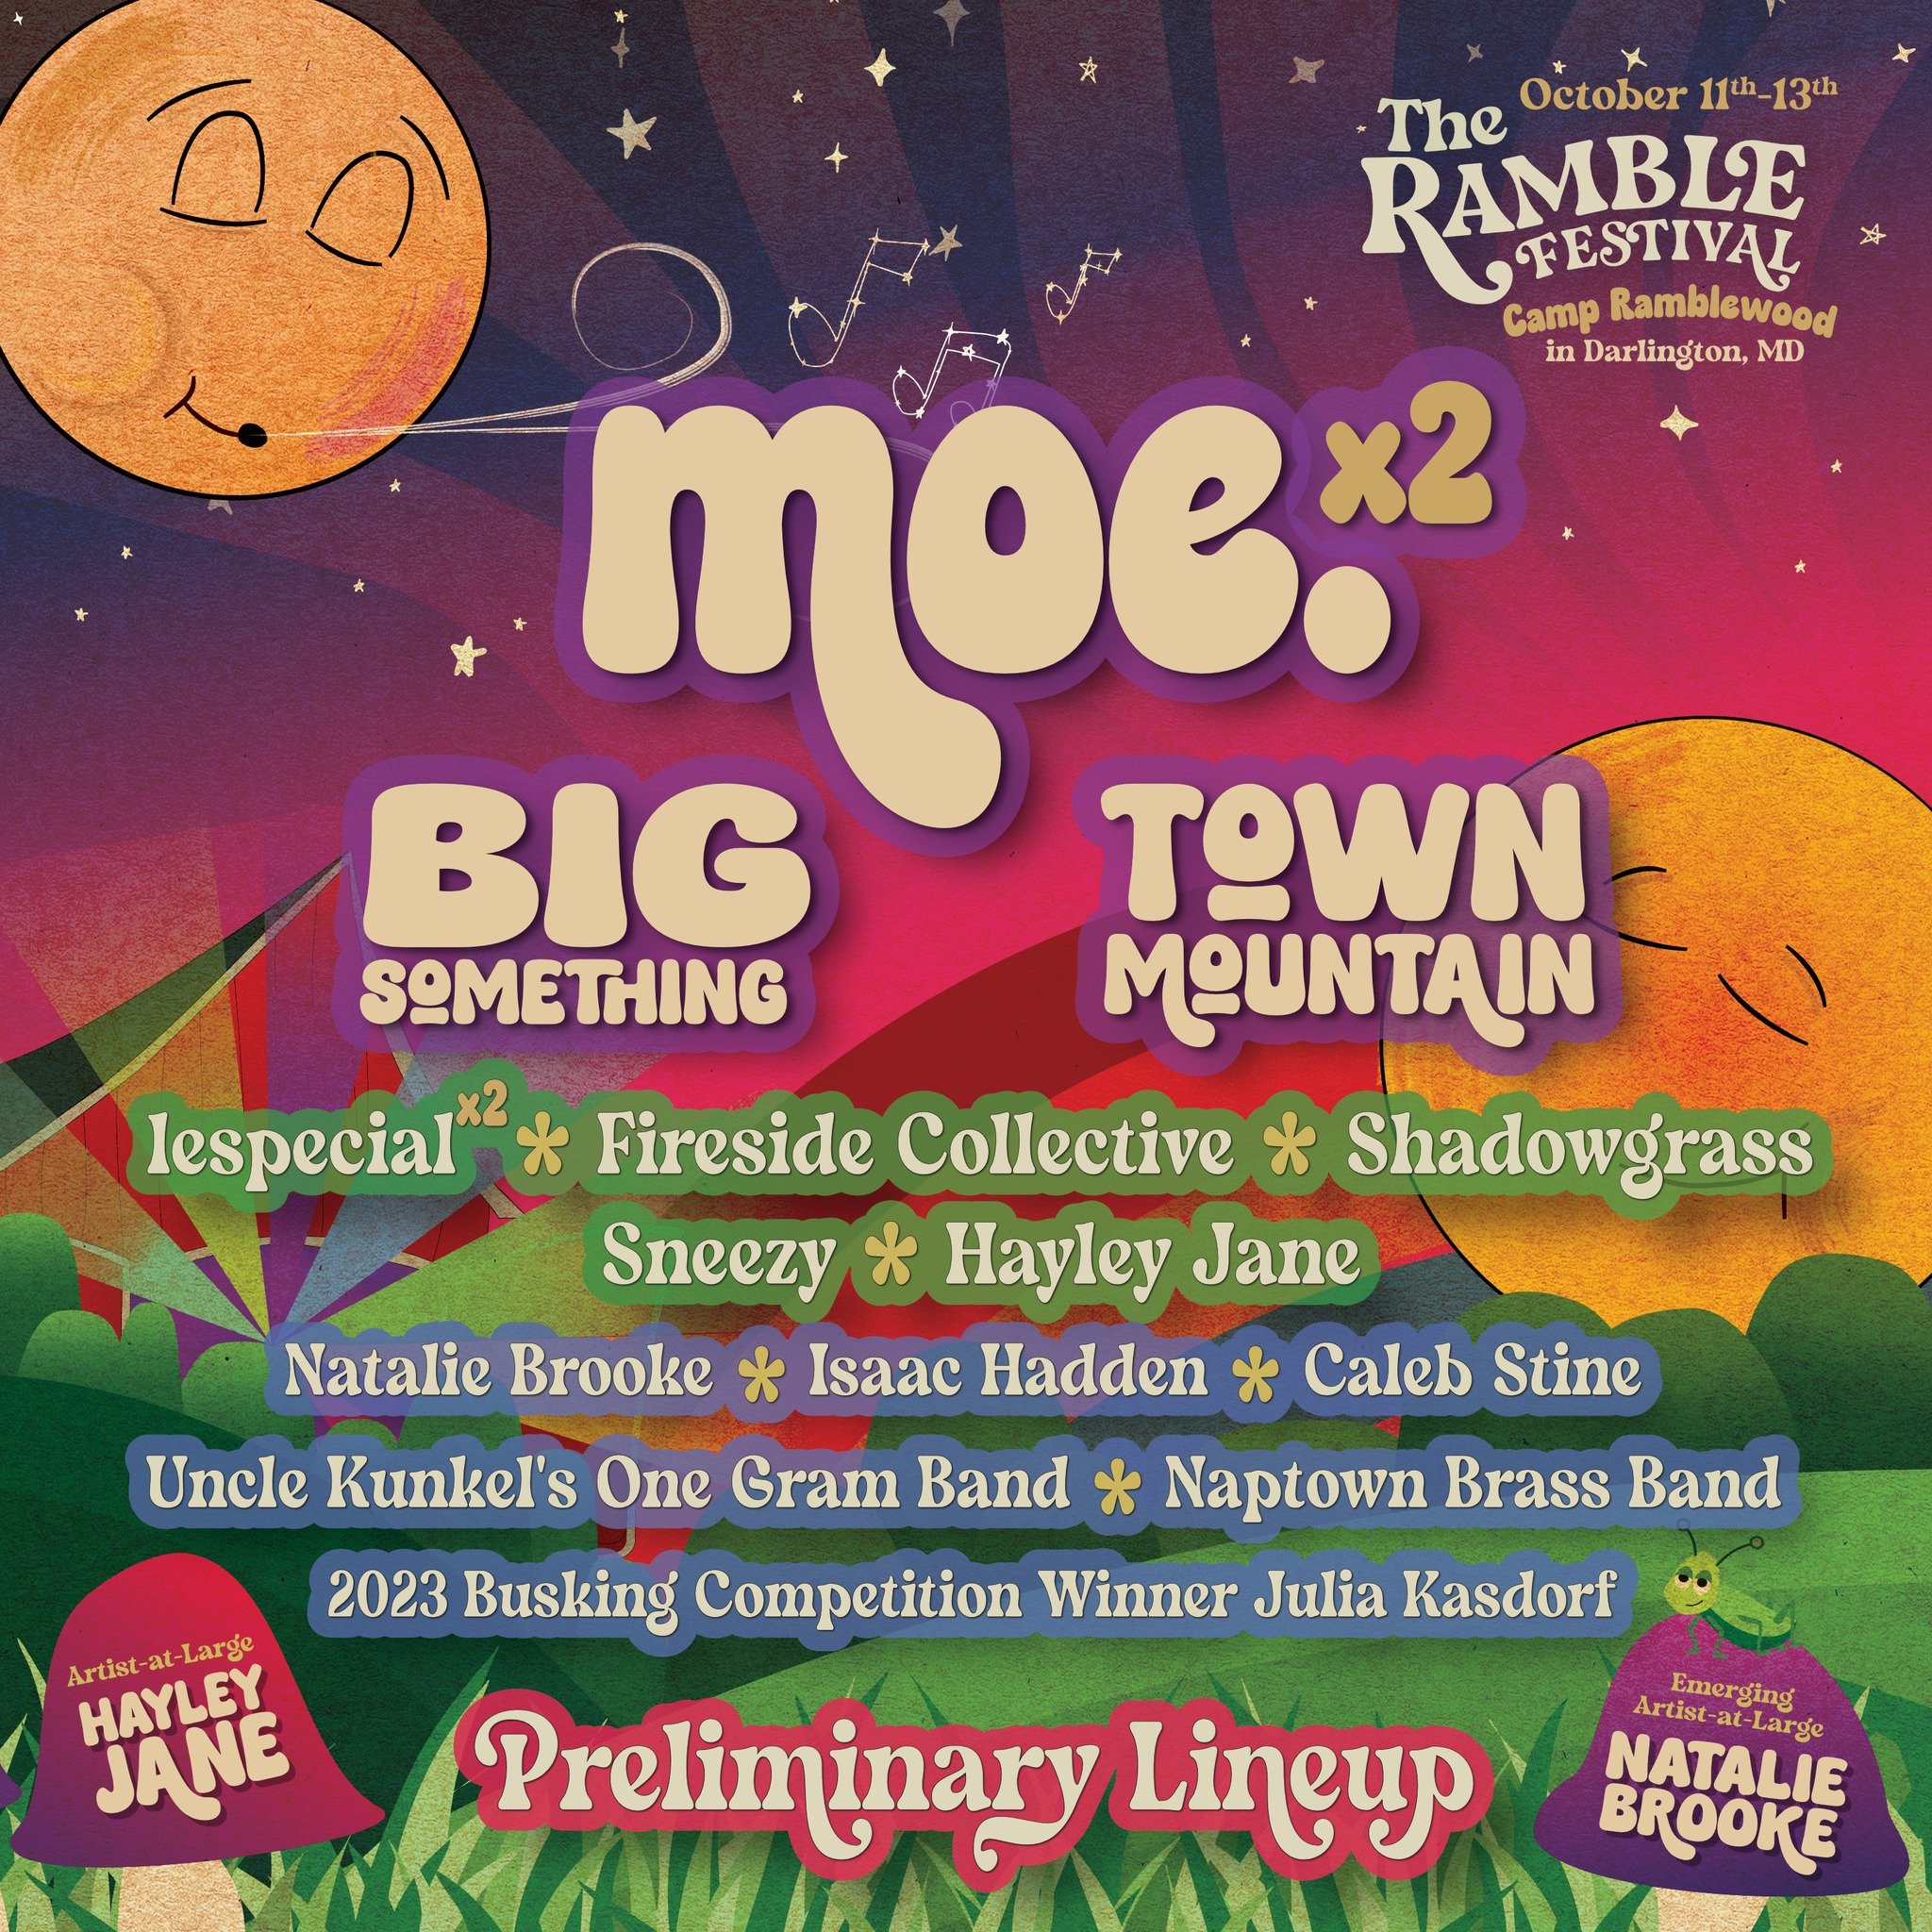 Alrighty, Ramblers! Gather &lsquo;round... The moment you&rsquo;ve been holding your breath for is here &ndash; the big reveal of our star-studded, soul-fueling preliminary lineup for this year&rsquo;s Ramble Festival! 

Hold onto your hats  though, 